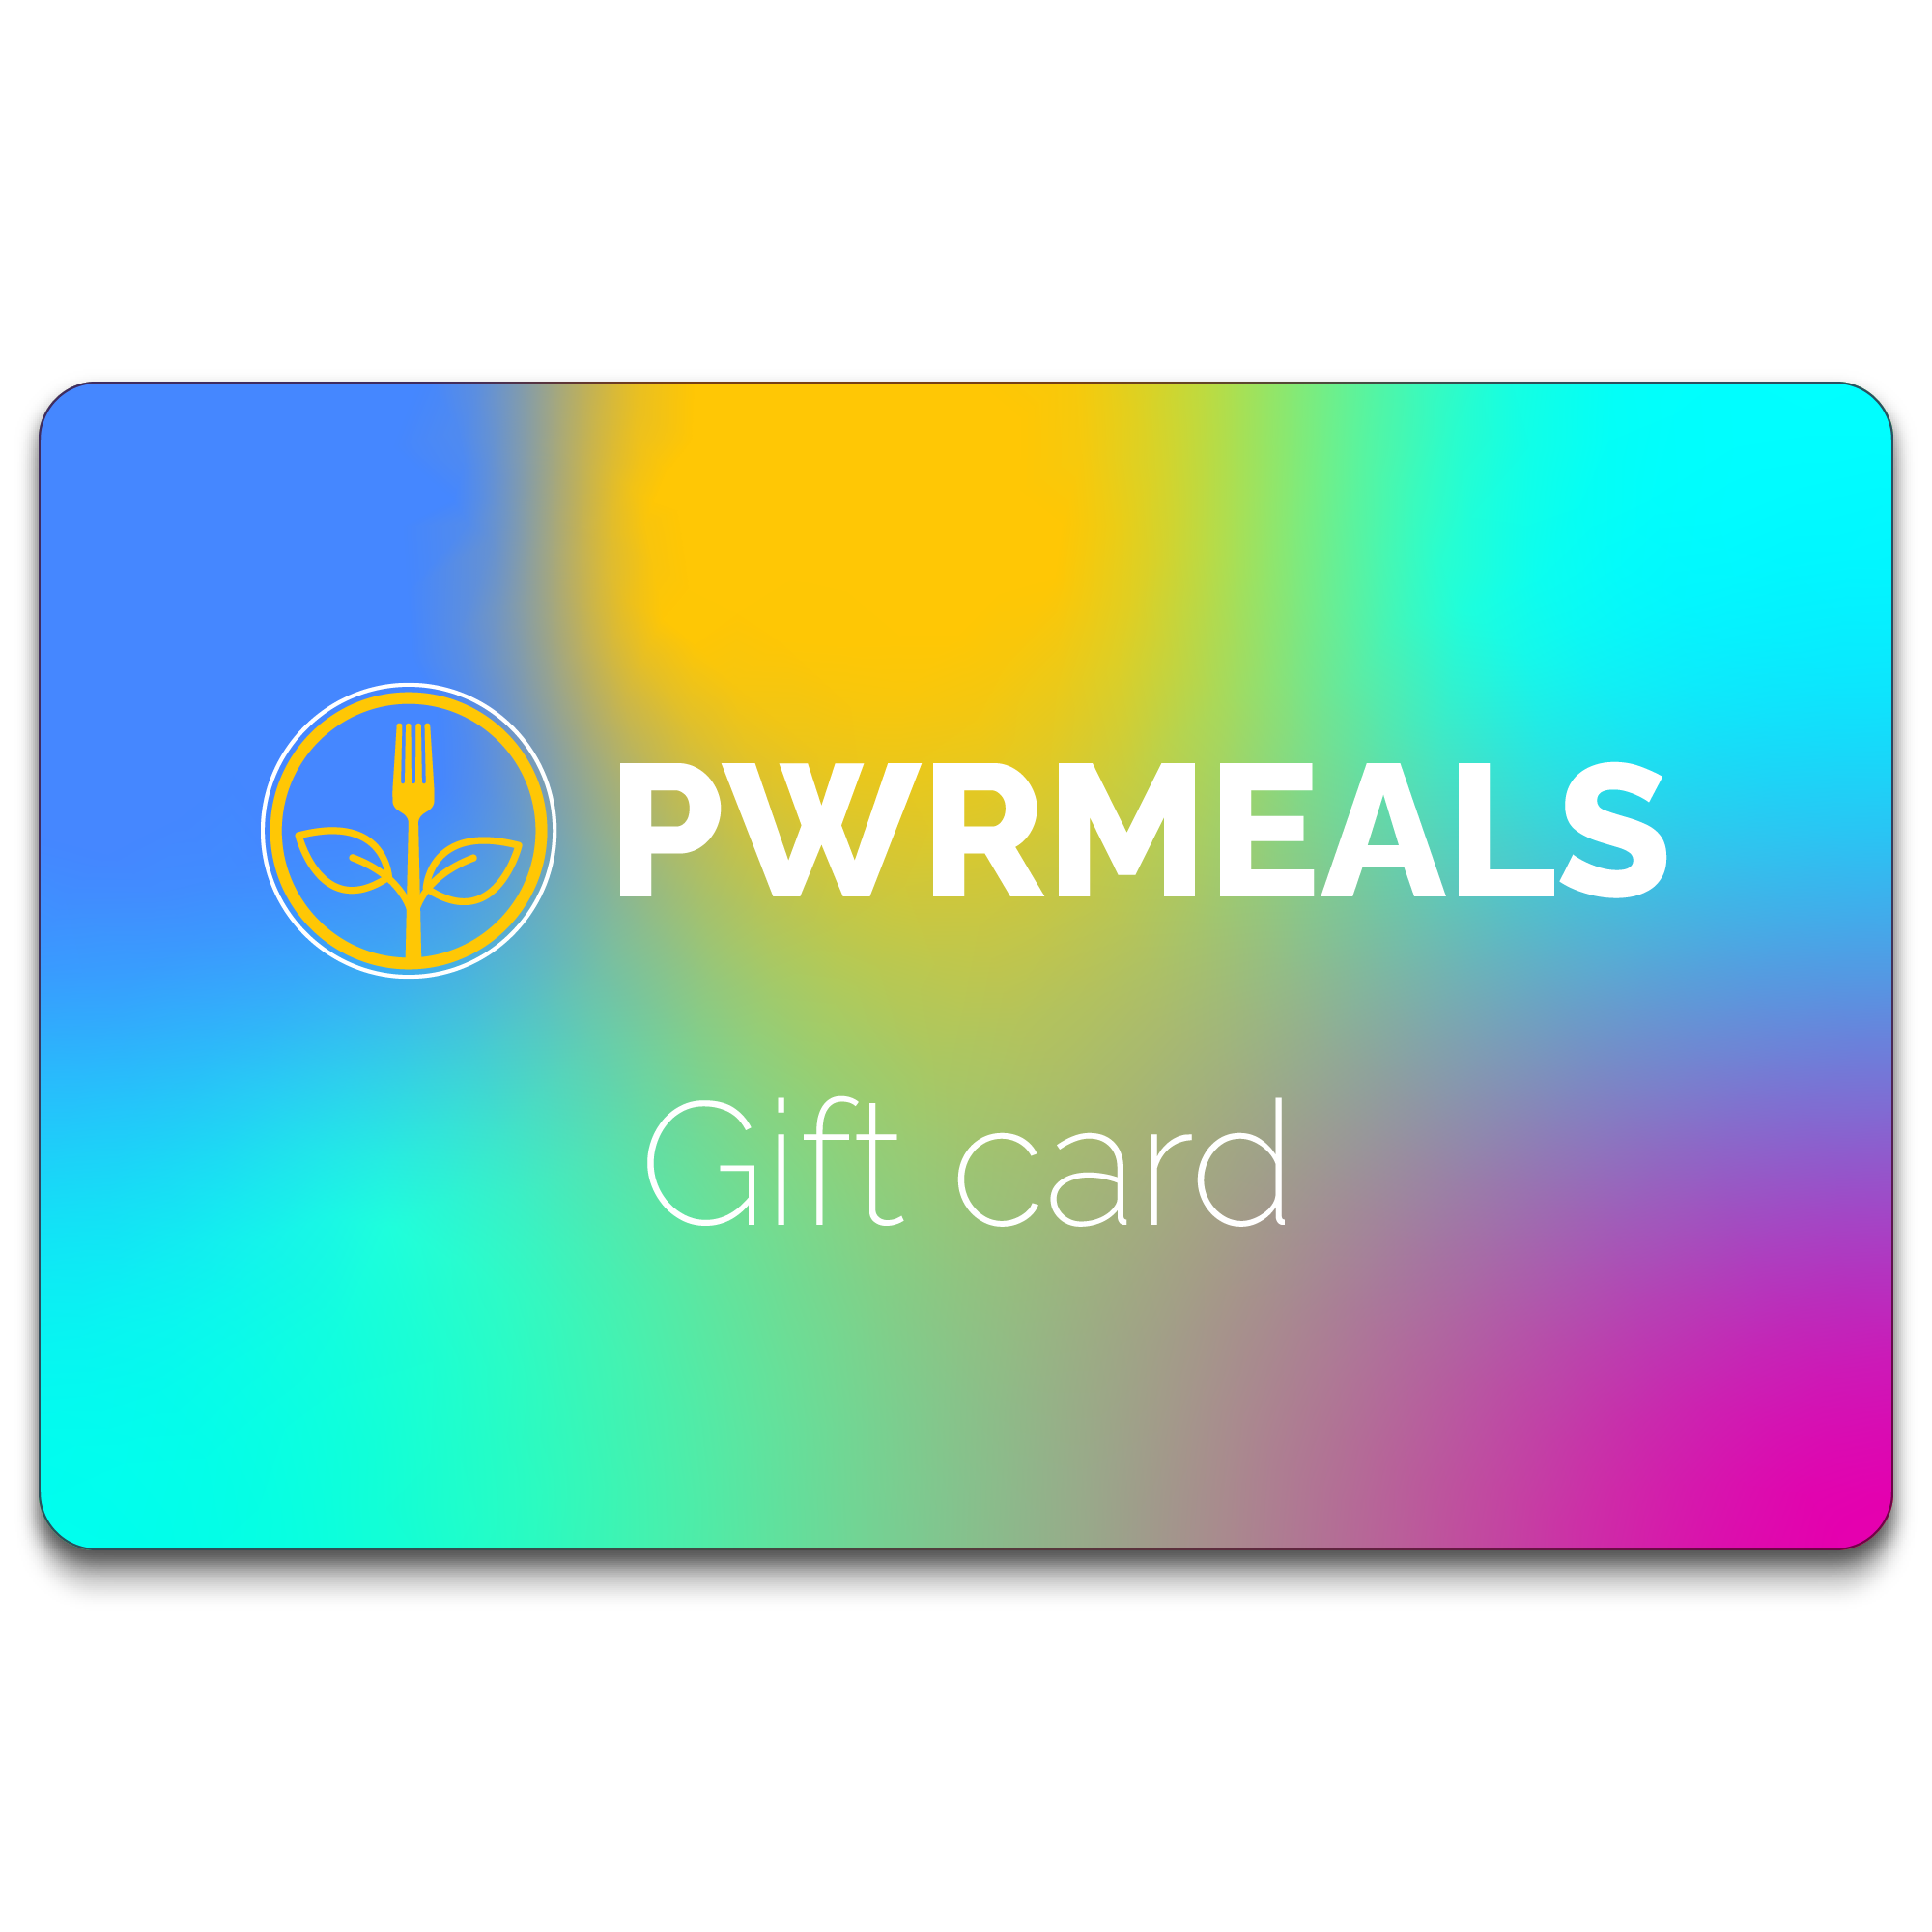 Pwrmeals gift cards